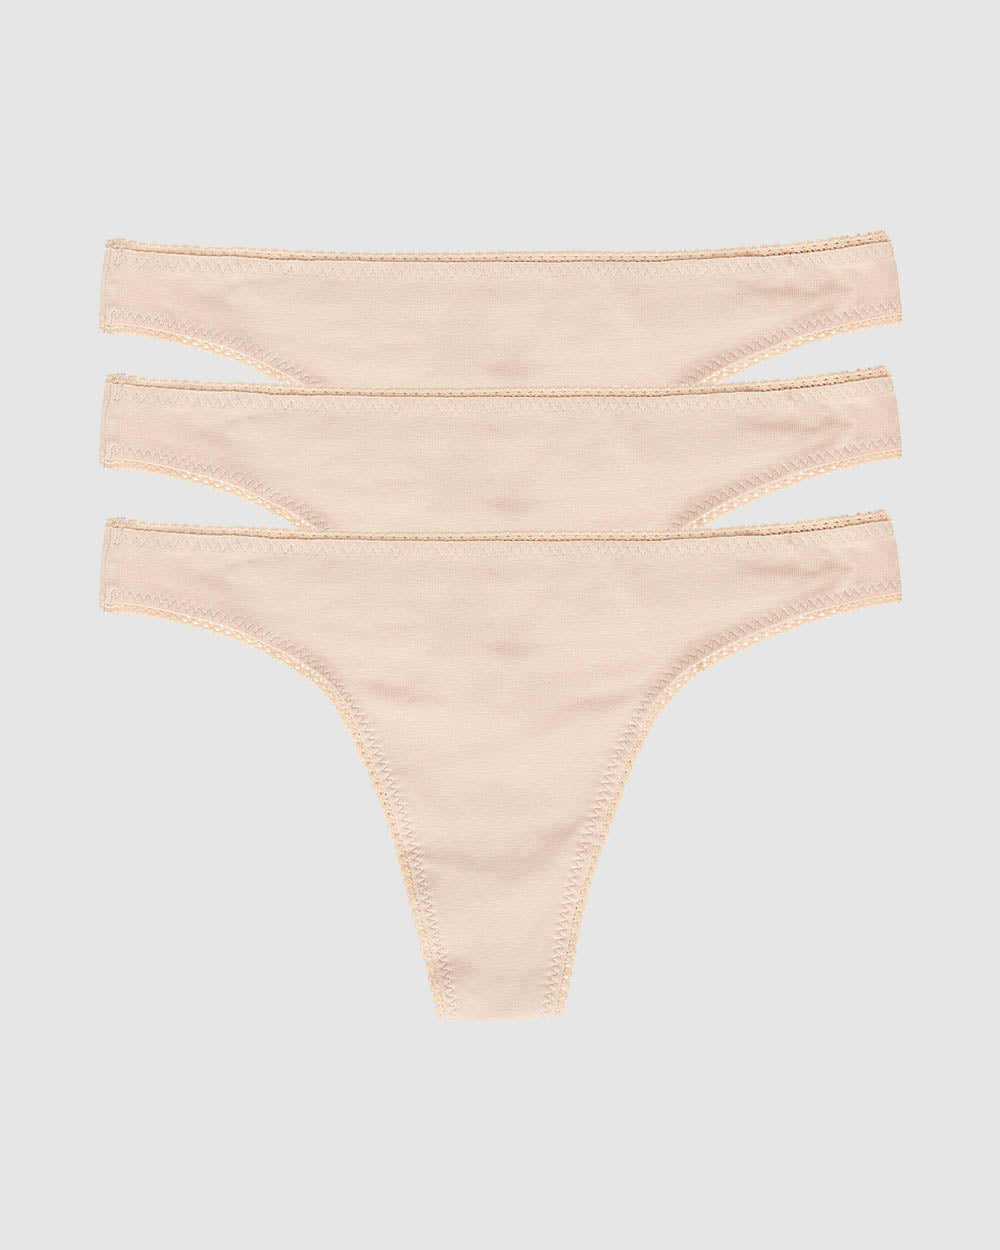 A Cabana Cotton Hip G Thong Underwear 3-Pack - Champagne